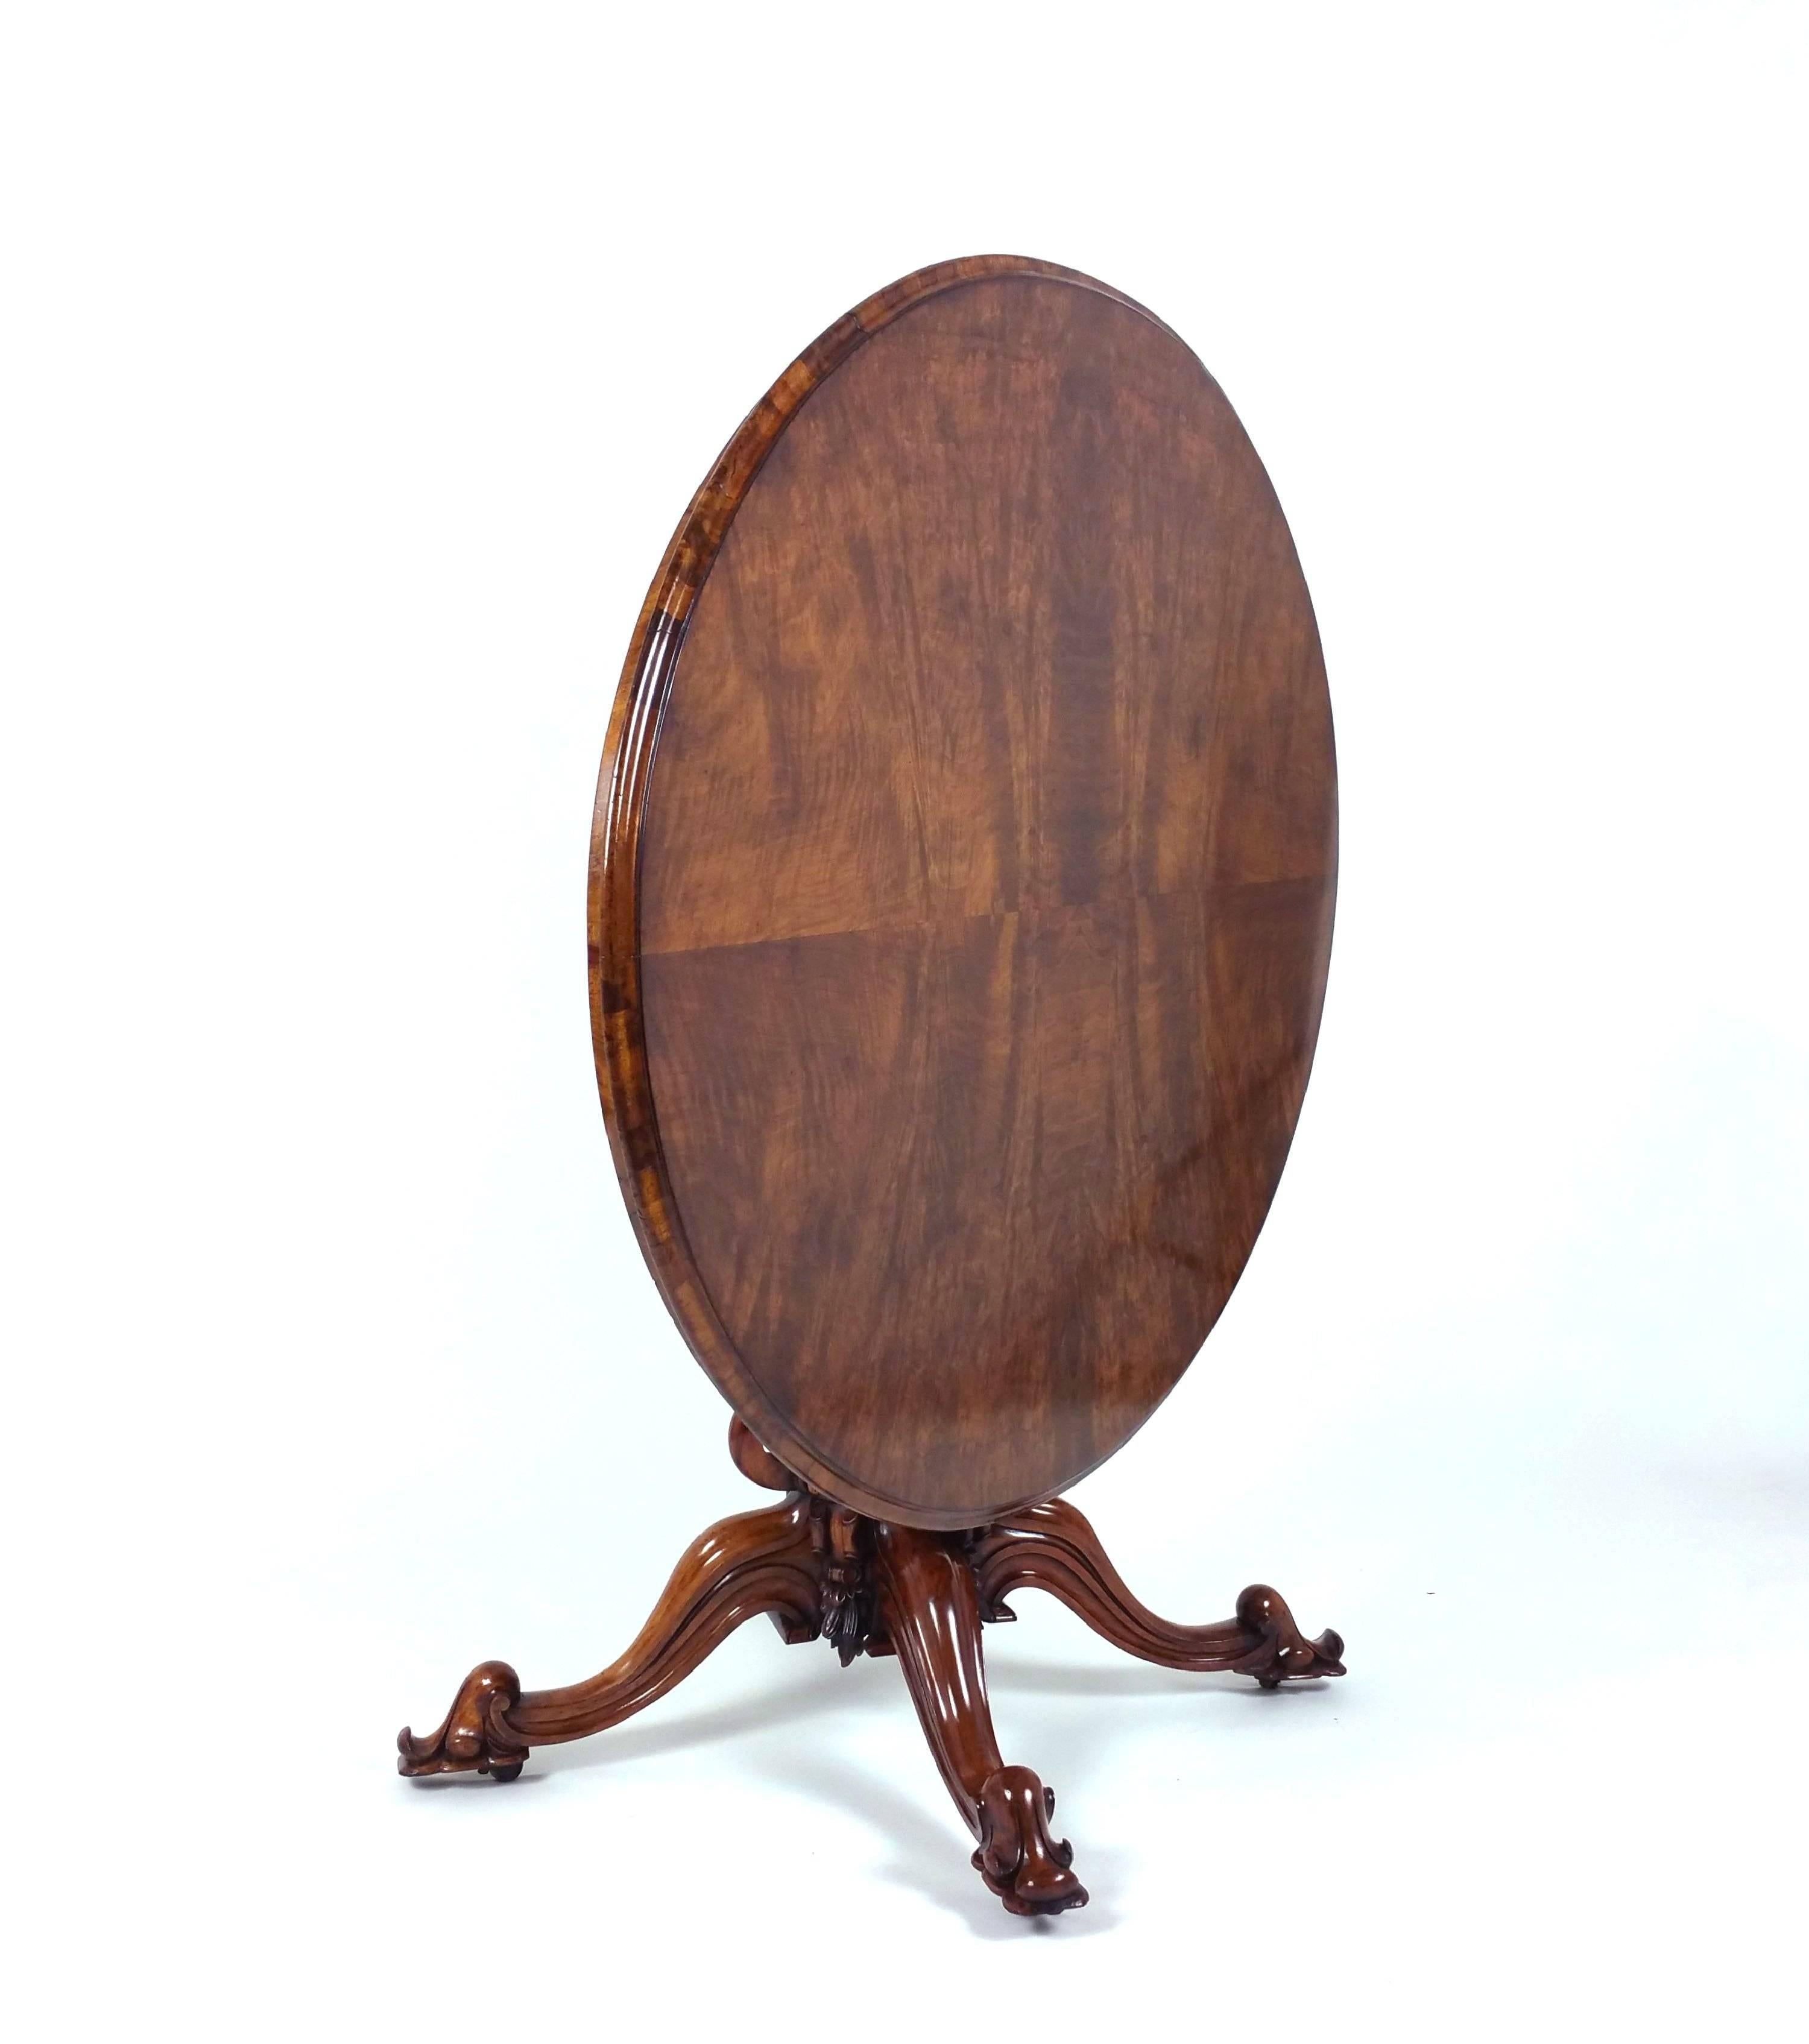 This well-proportioned and stunning early Victorian figured walnut oval center table features a tilt-top design on a very ornately carved and pierced Quadra form base. It measures 58 in – 147.3 cm wide by 43 in – 109.2 cm deep with a height of 28 ¼